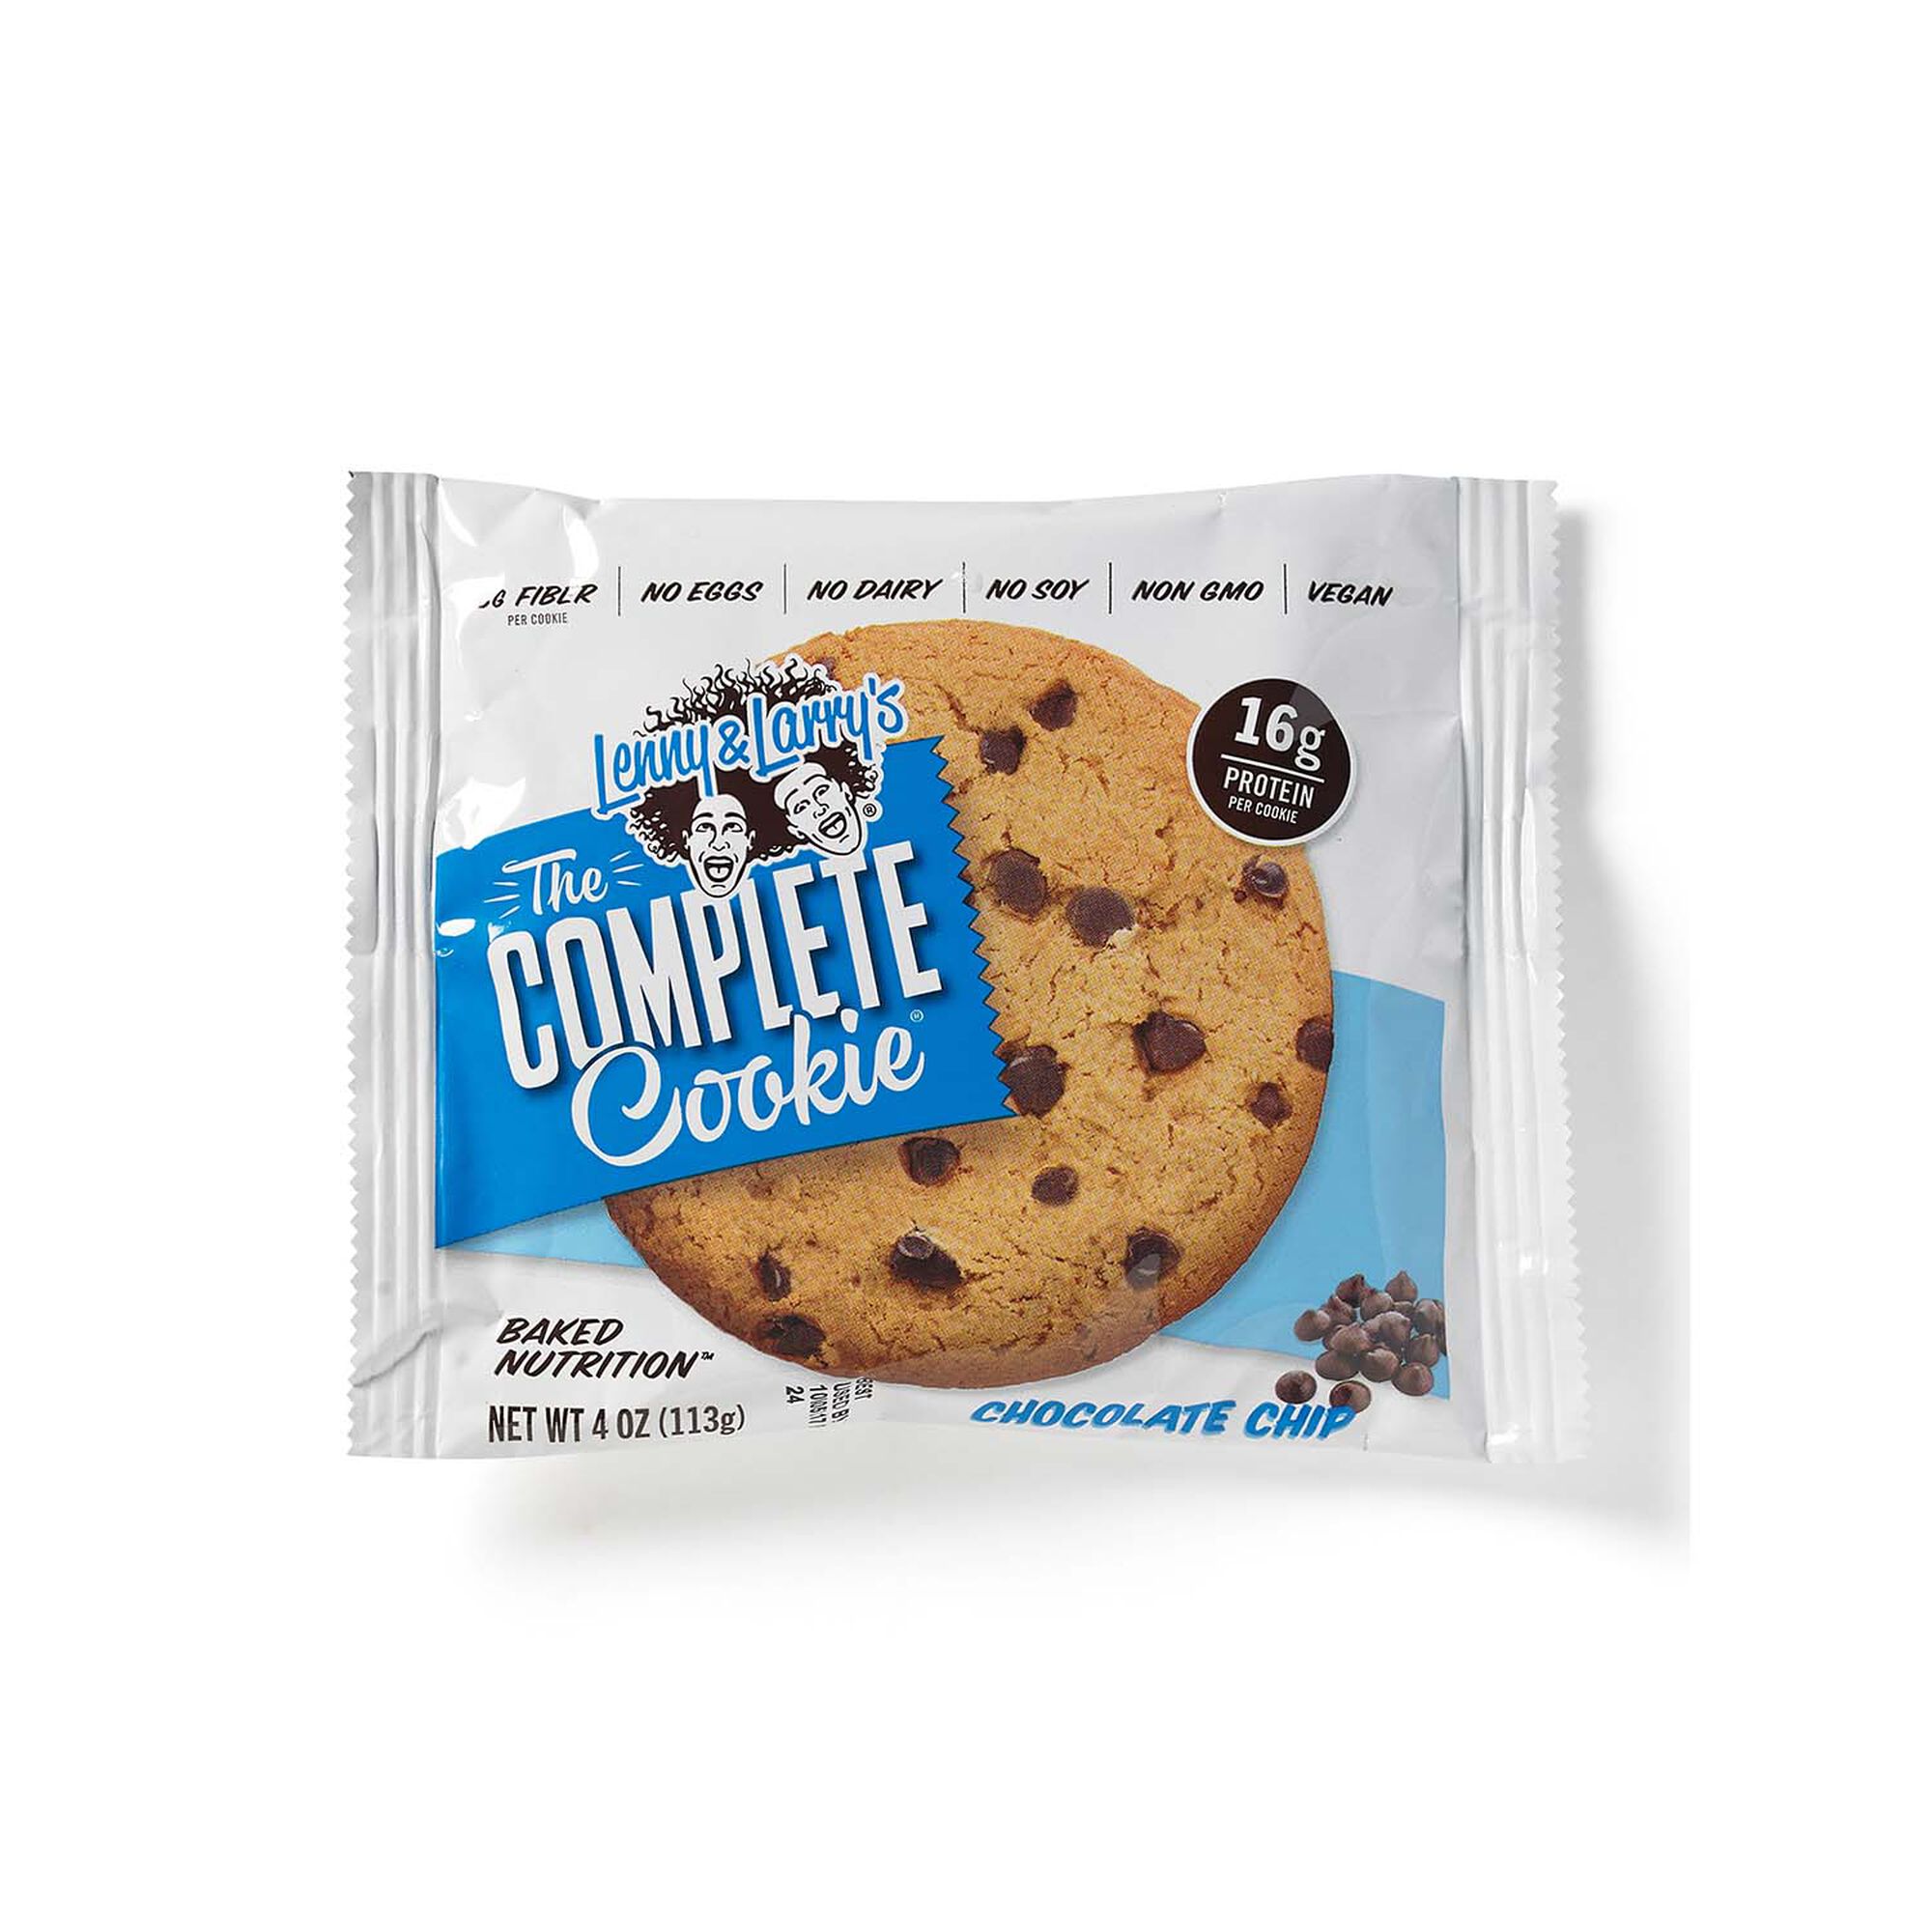 The Complete Cookie - Chocolate Chip - 1 Cookie - Lenny & Larry's - Meal Replacement Bars